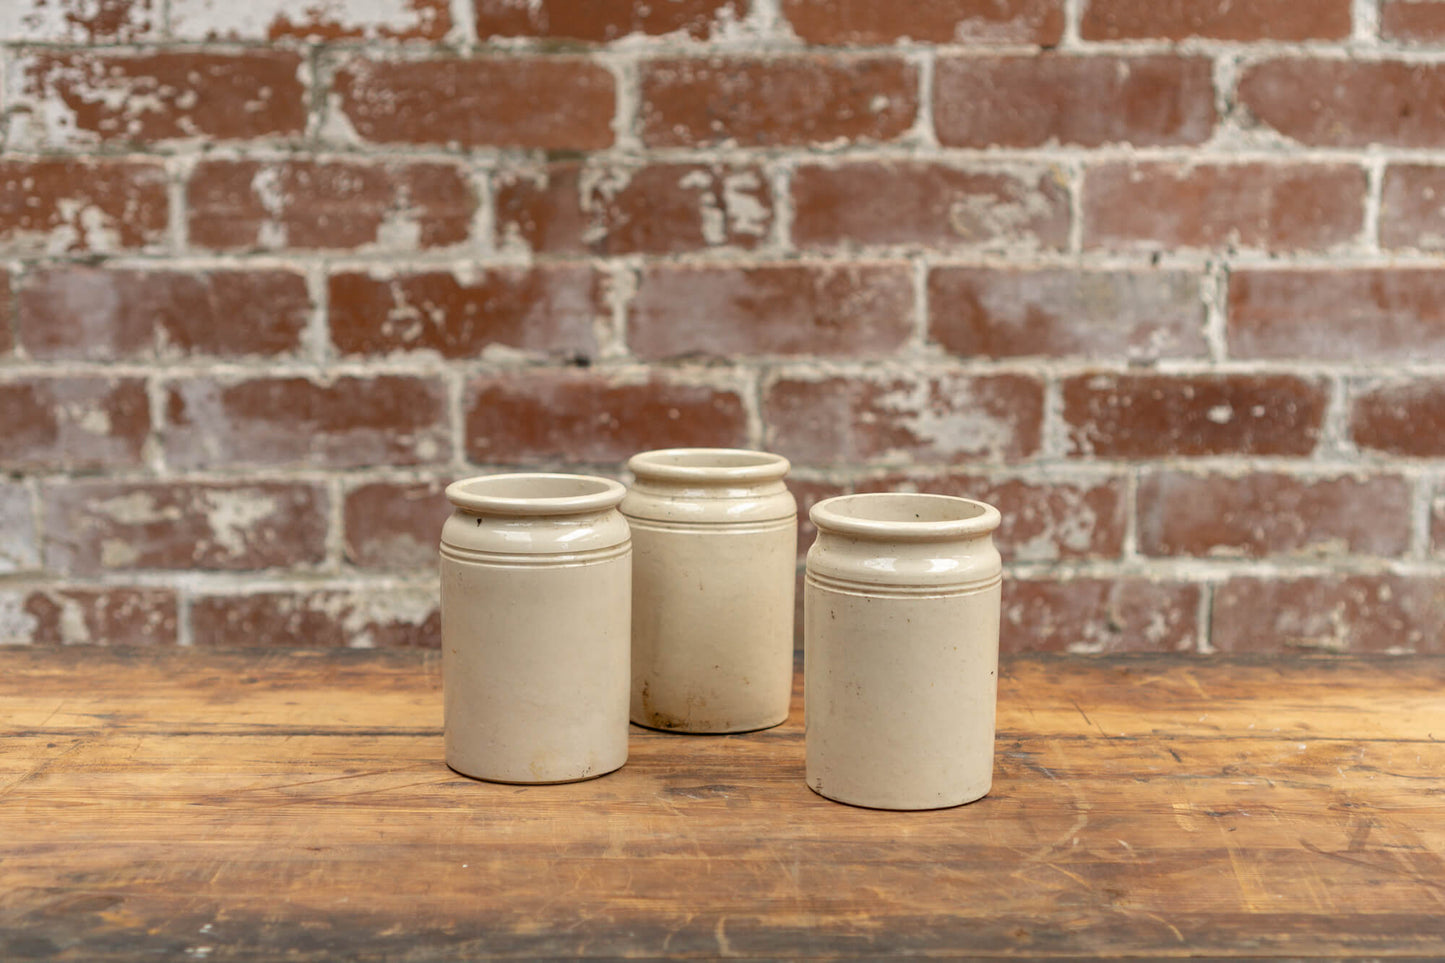 Photo shows 3 various sized salvaged Victorian stoneware jam conserve jars against a brick wall background. The jars are cream coloured with a glaze.